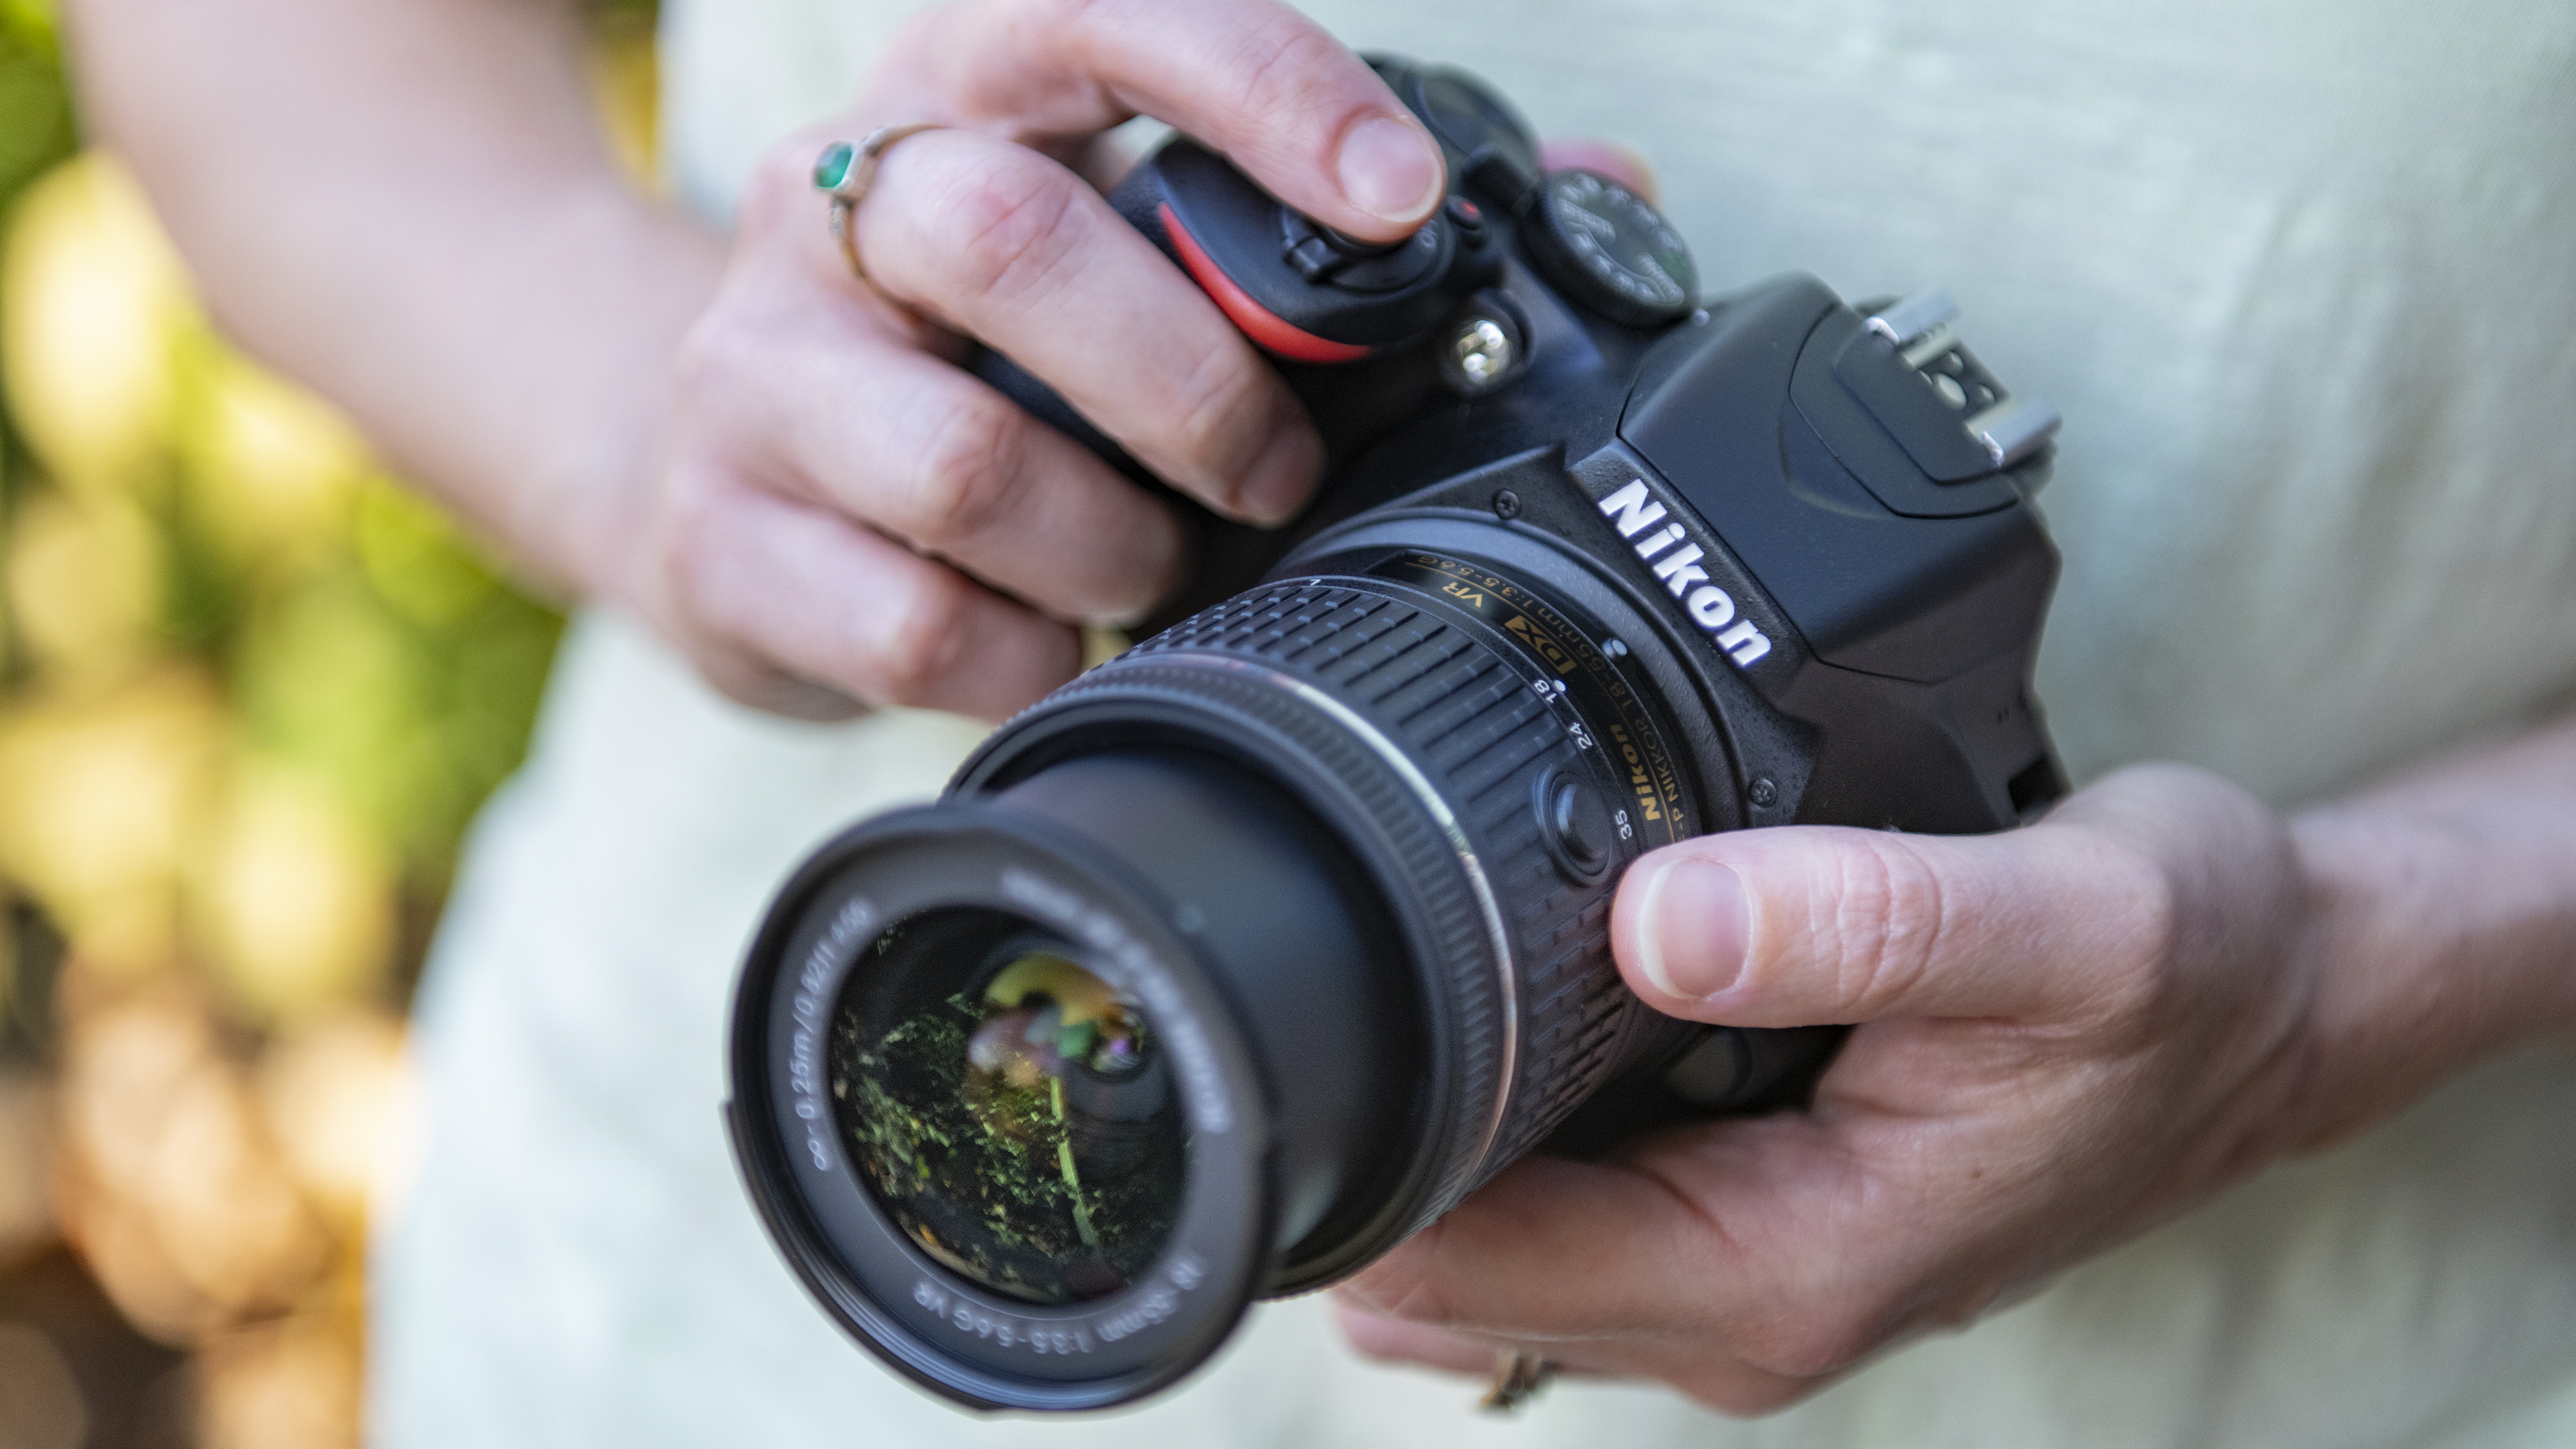 Hands holding the Nikon D3500 with its kit lens